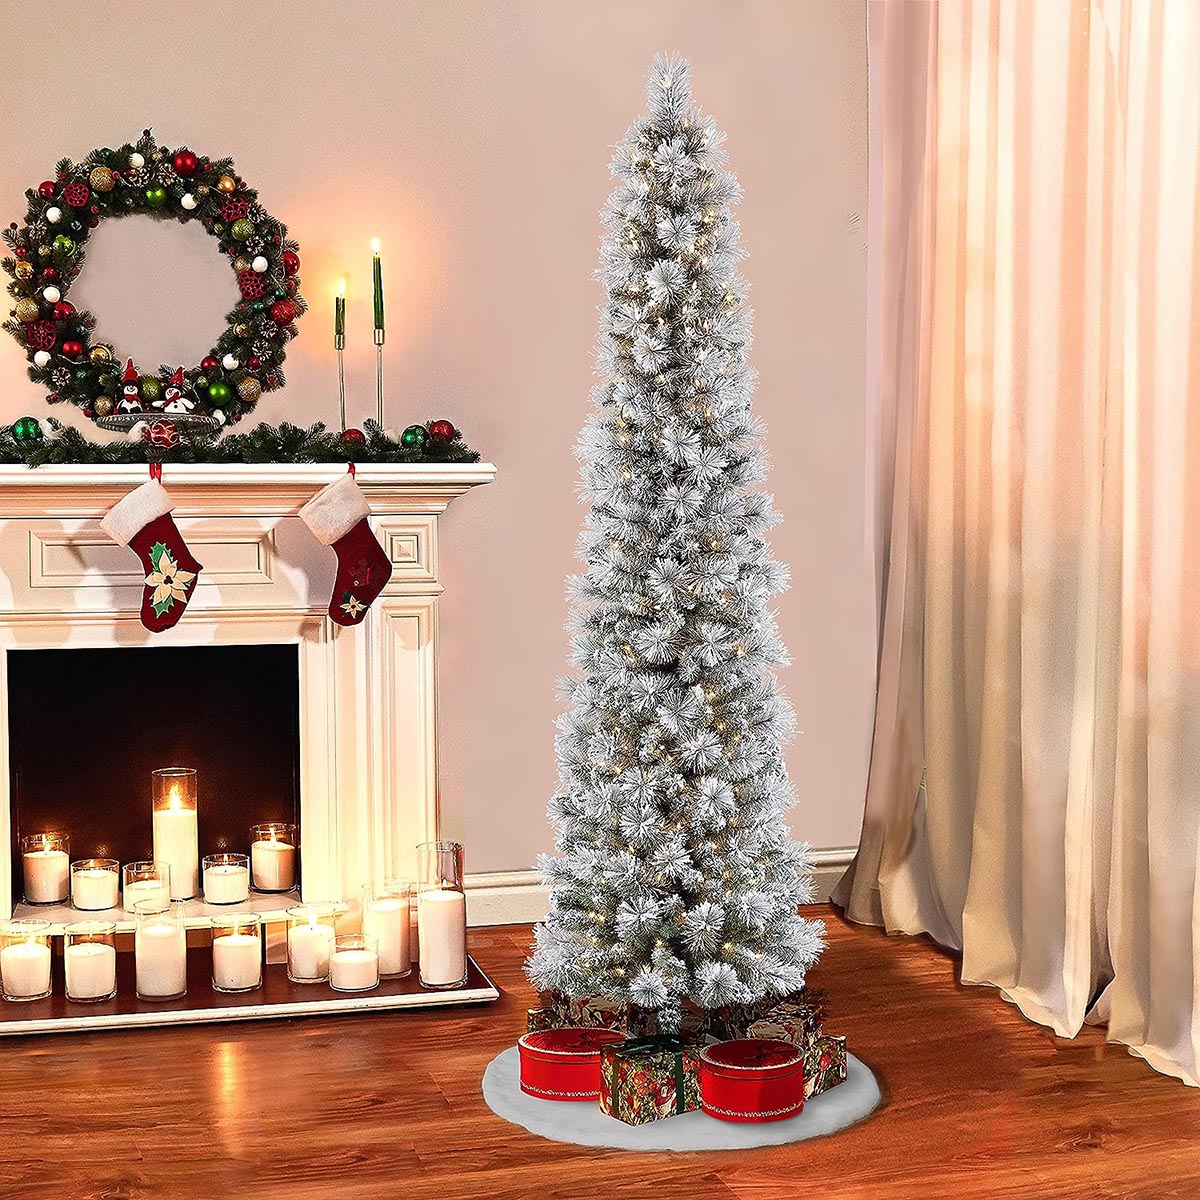 The Puleo International Prelit Flocked Pencil Tree with presents underneath while set up next to a fireplace filled with lit candles and decorated with a wreath and stockings.